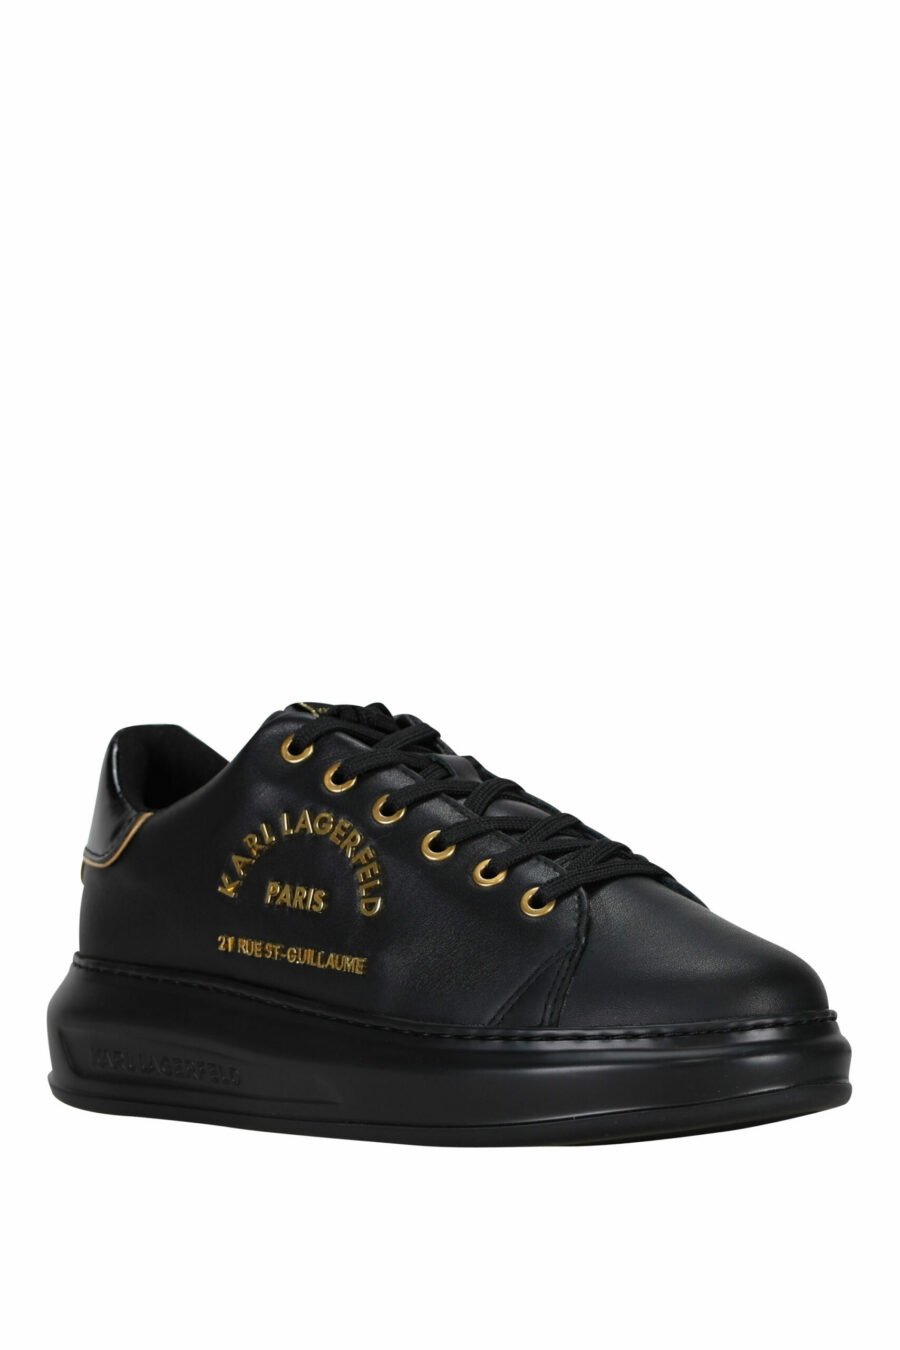 Black trainers with golden "rue st guillaume" logo in metal - 5059529362699 1 scaled